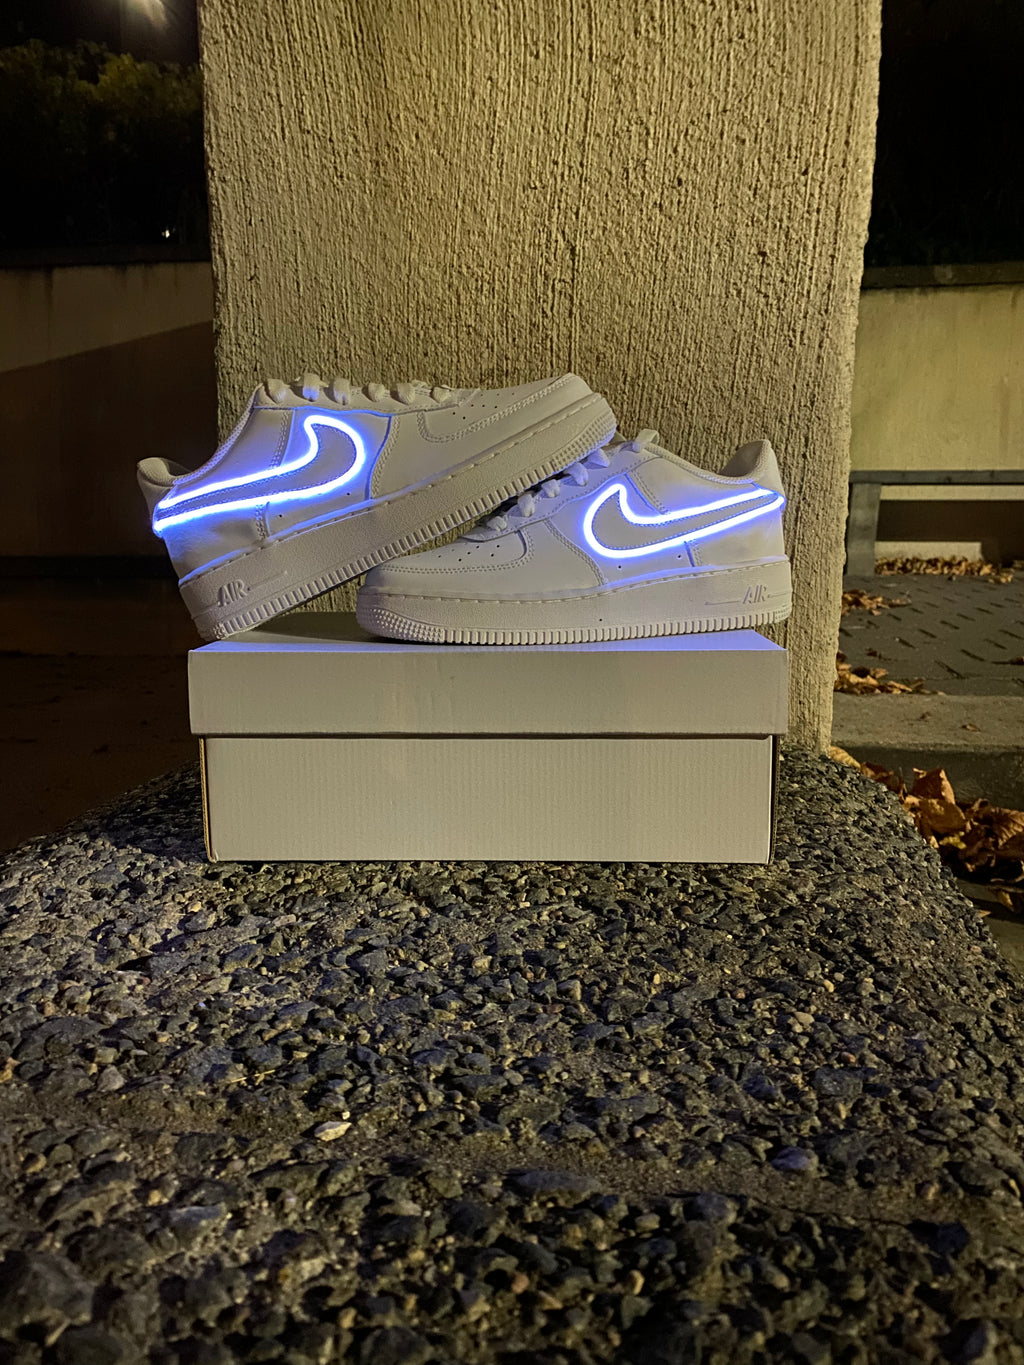 Oxido idioma En el piso Light Up Nike Shoes Neon Lights, one button 5 modes, USB Rechargeable –  LightUpNike